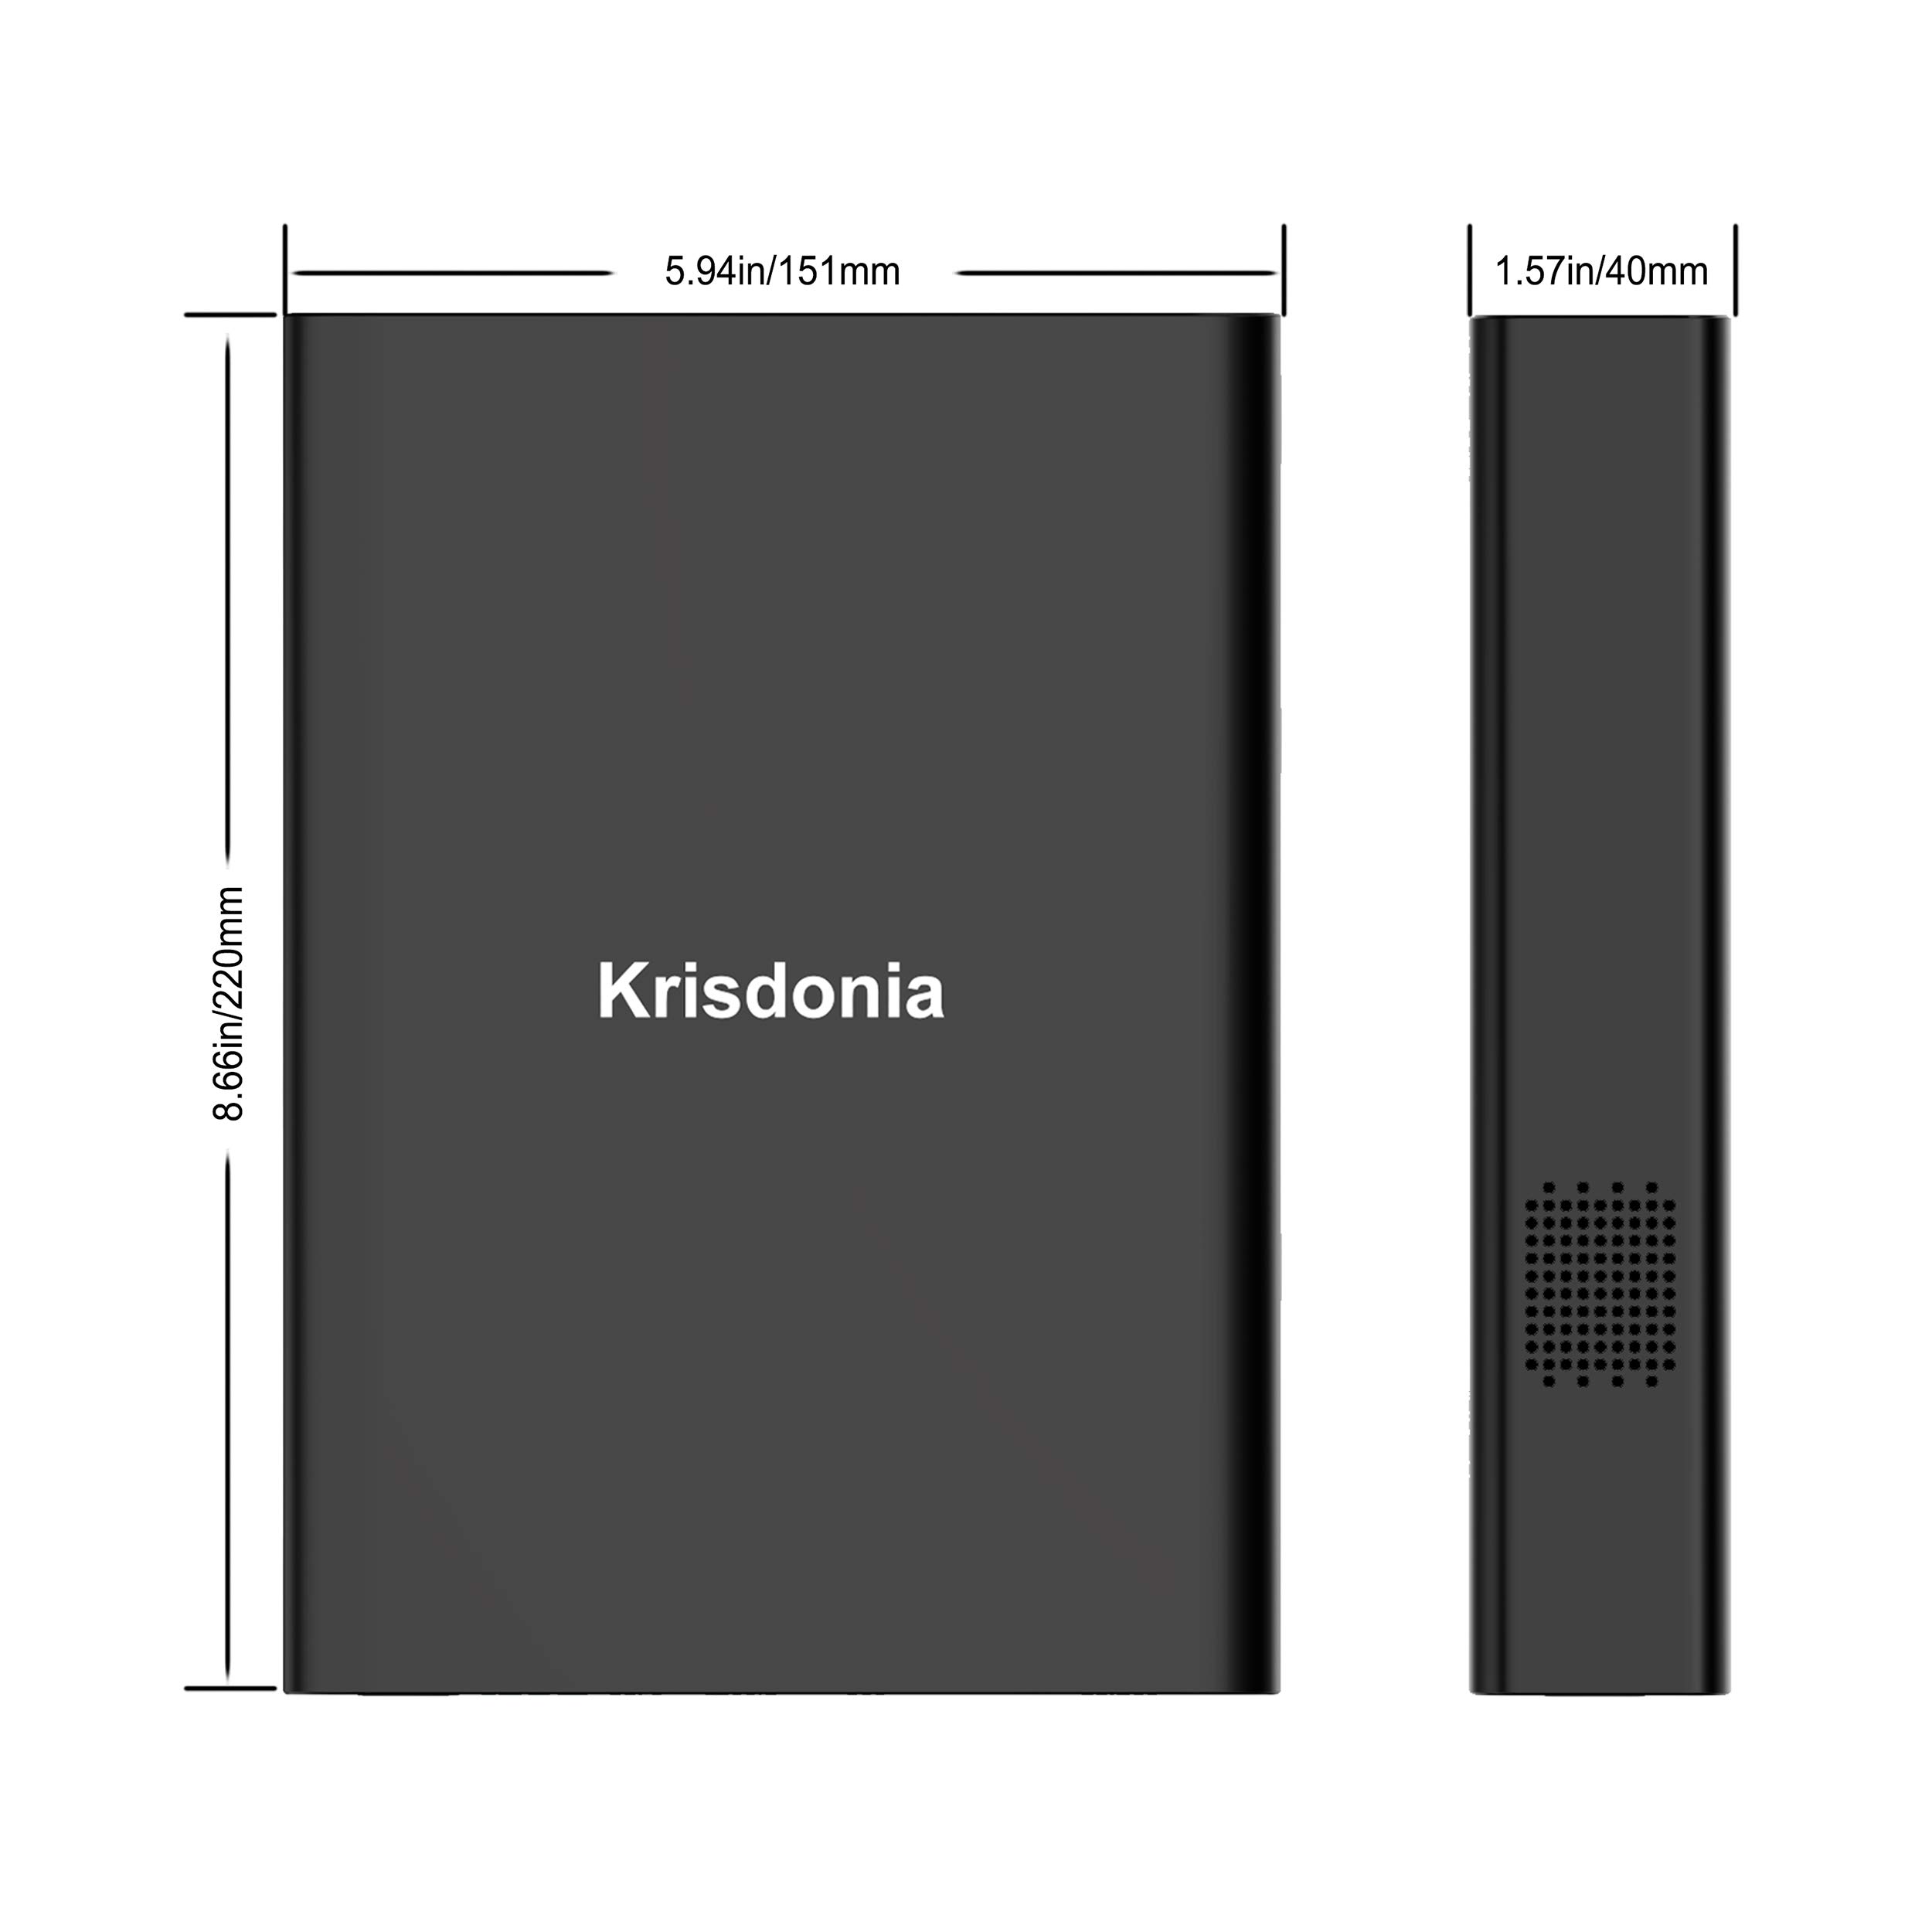 Krisdonia AC Outlet Portable Charger 60000mAh 110V/130W Laptop Power Bank with AC Outlet, 2 USB QC 3.0 and Type-C for Laptop, CPAP, Drone, Projector, Smartphone and Others